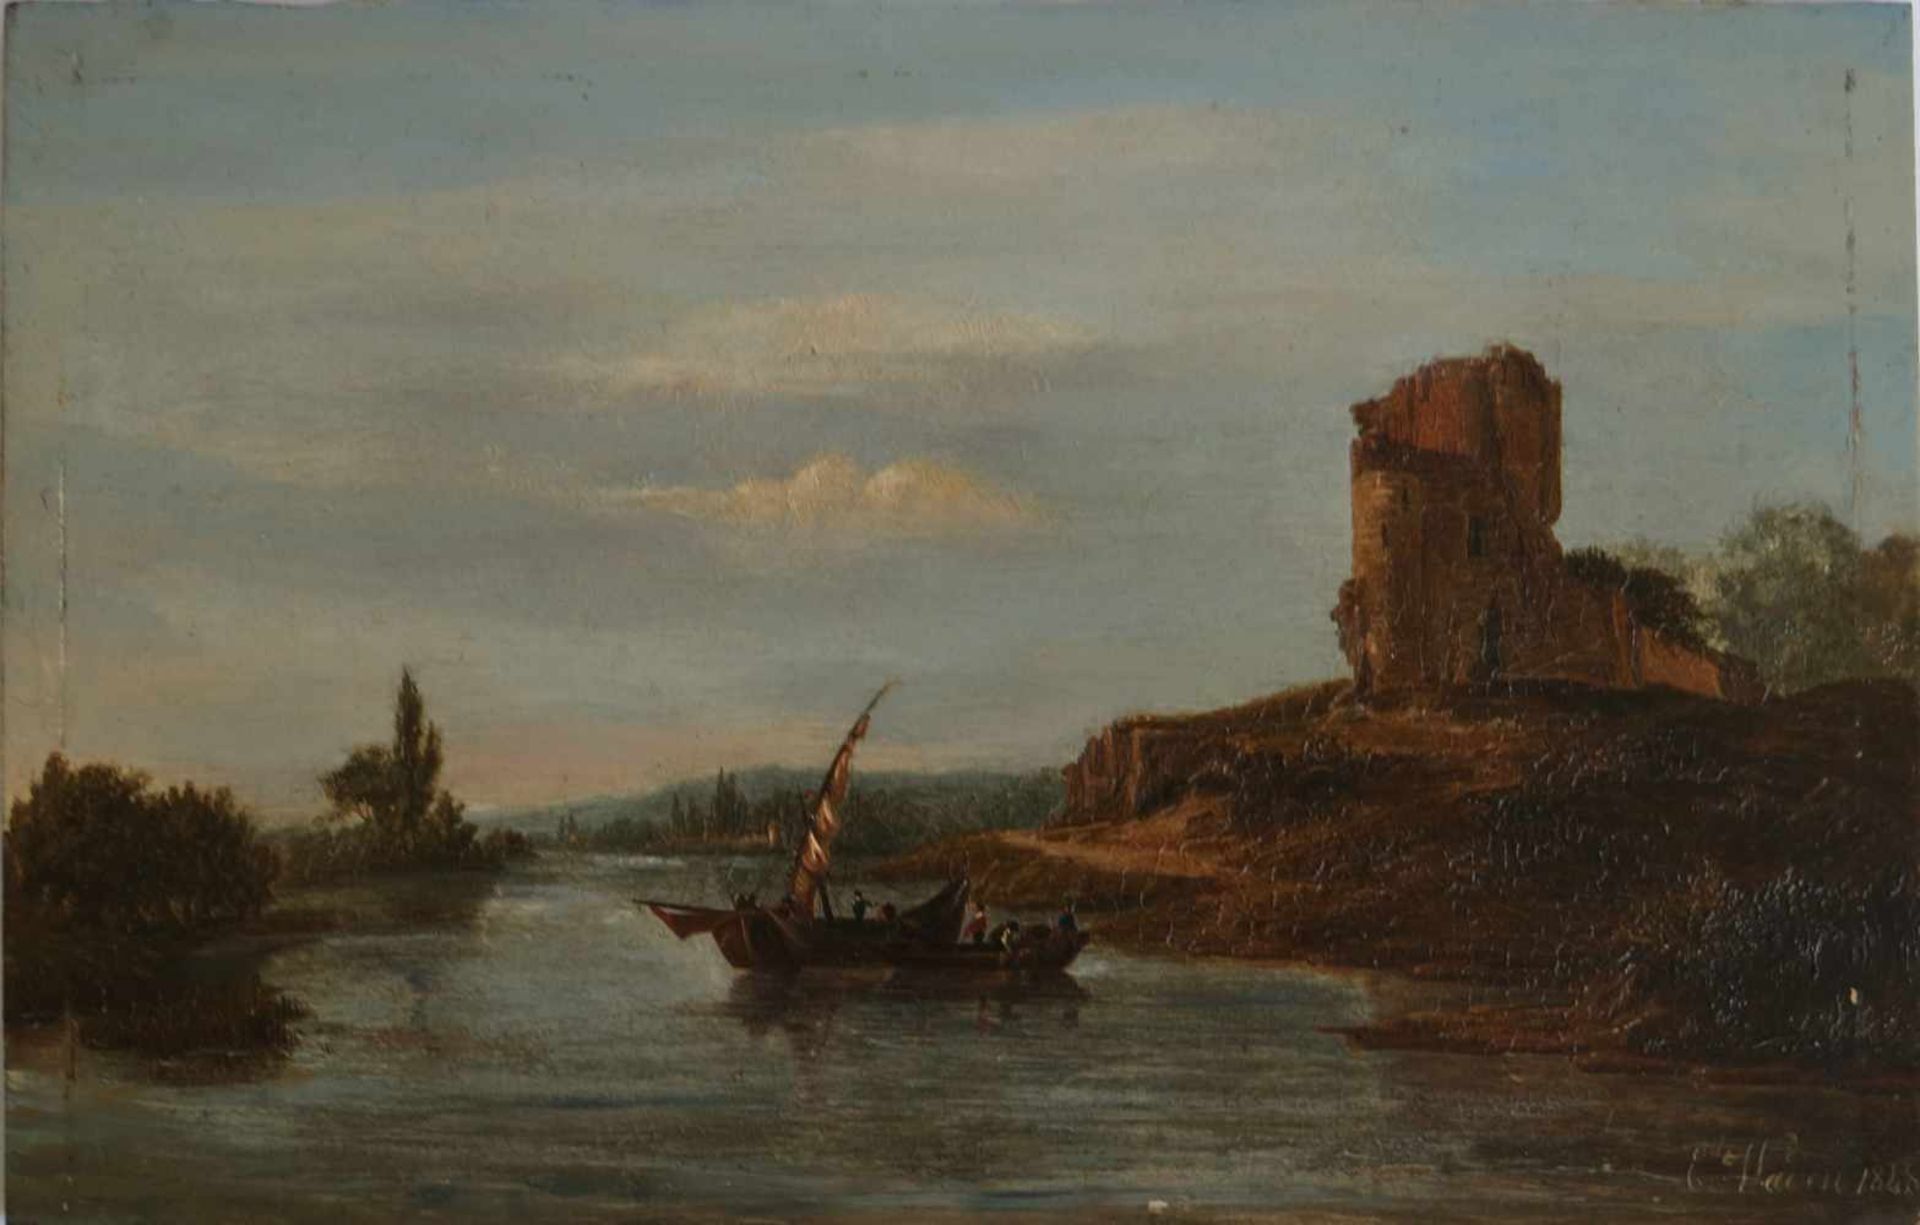 Édouard WADIN (c. 1820-?) Oil on panel Landscape with river and boat 31,5 x 20,5 cm signed and